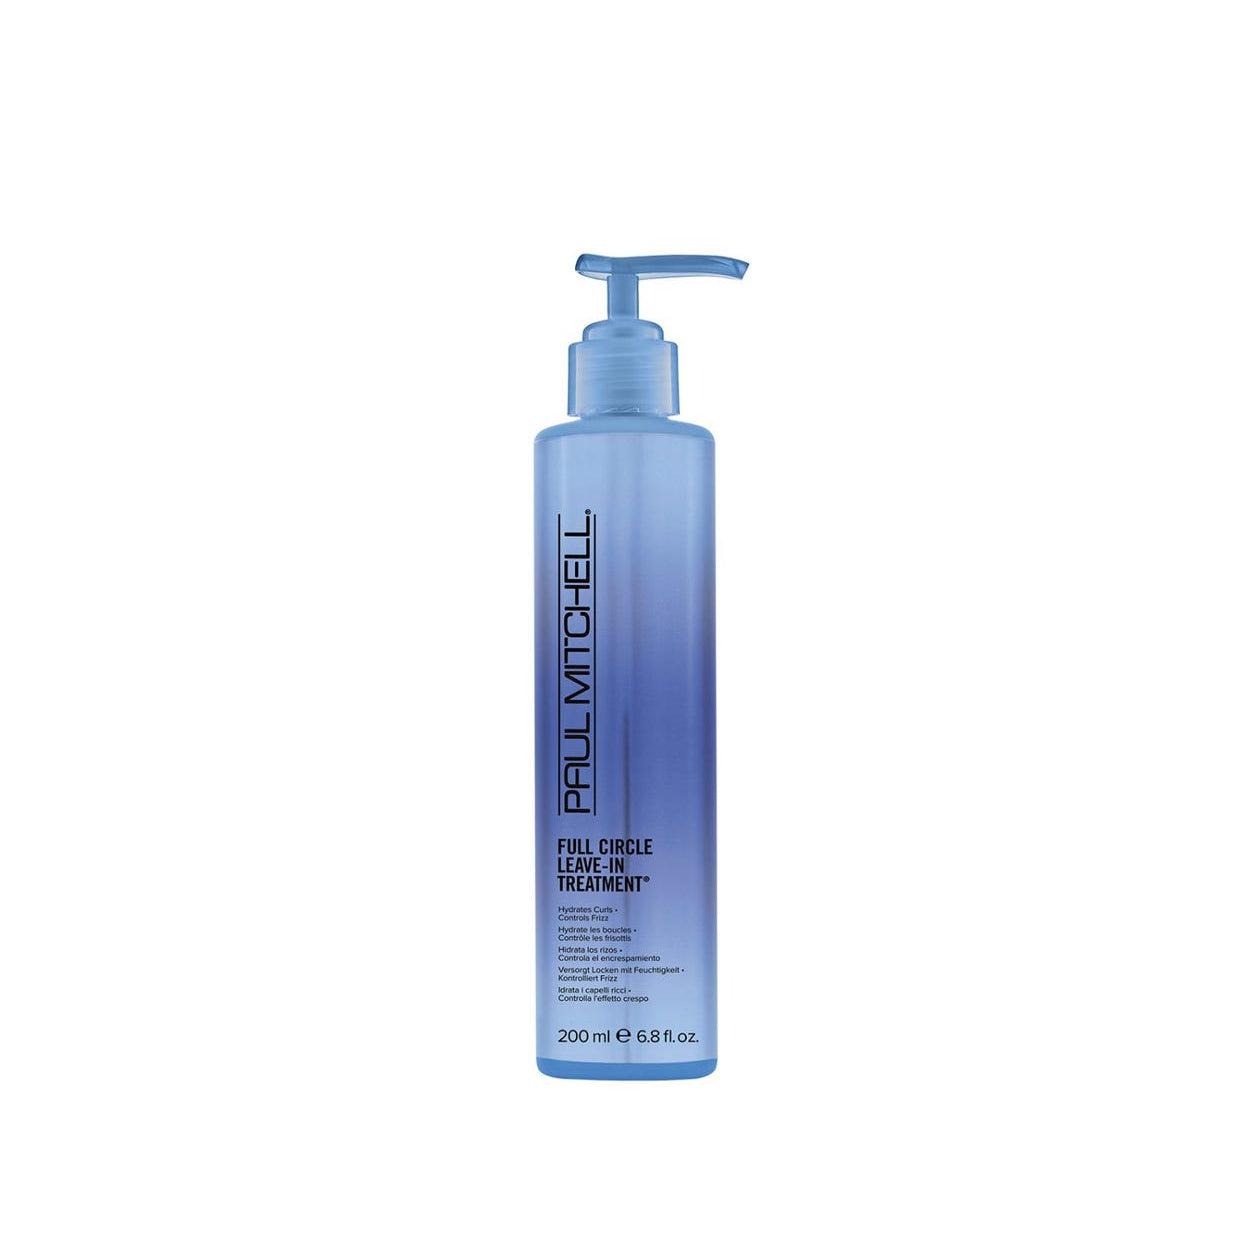 Paul Mitchell full circle leave-in treatment 200ml